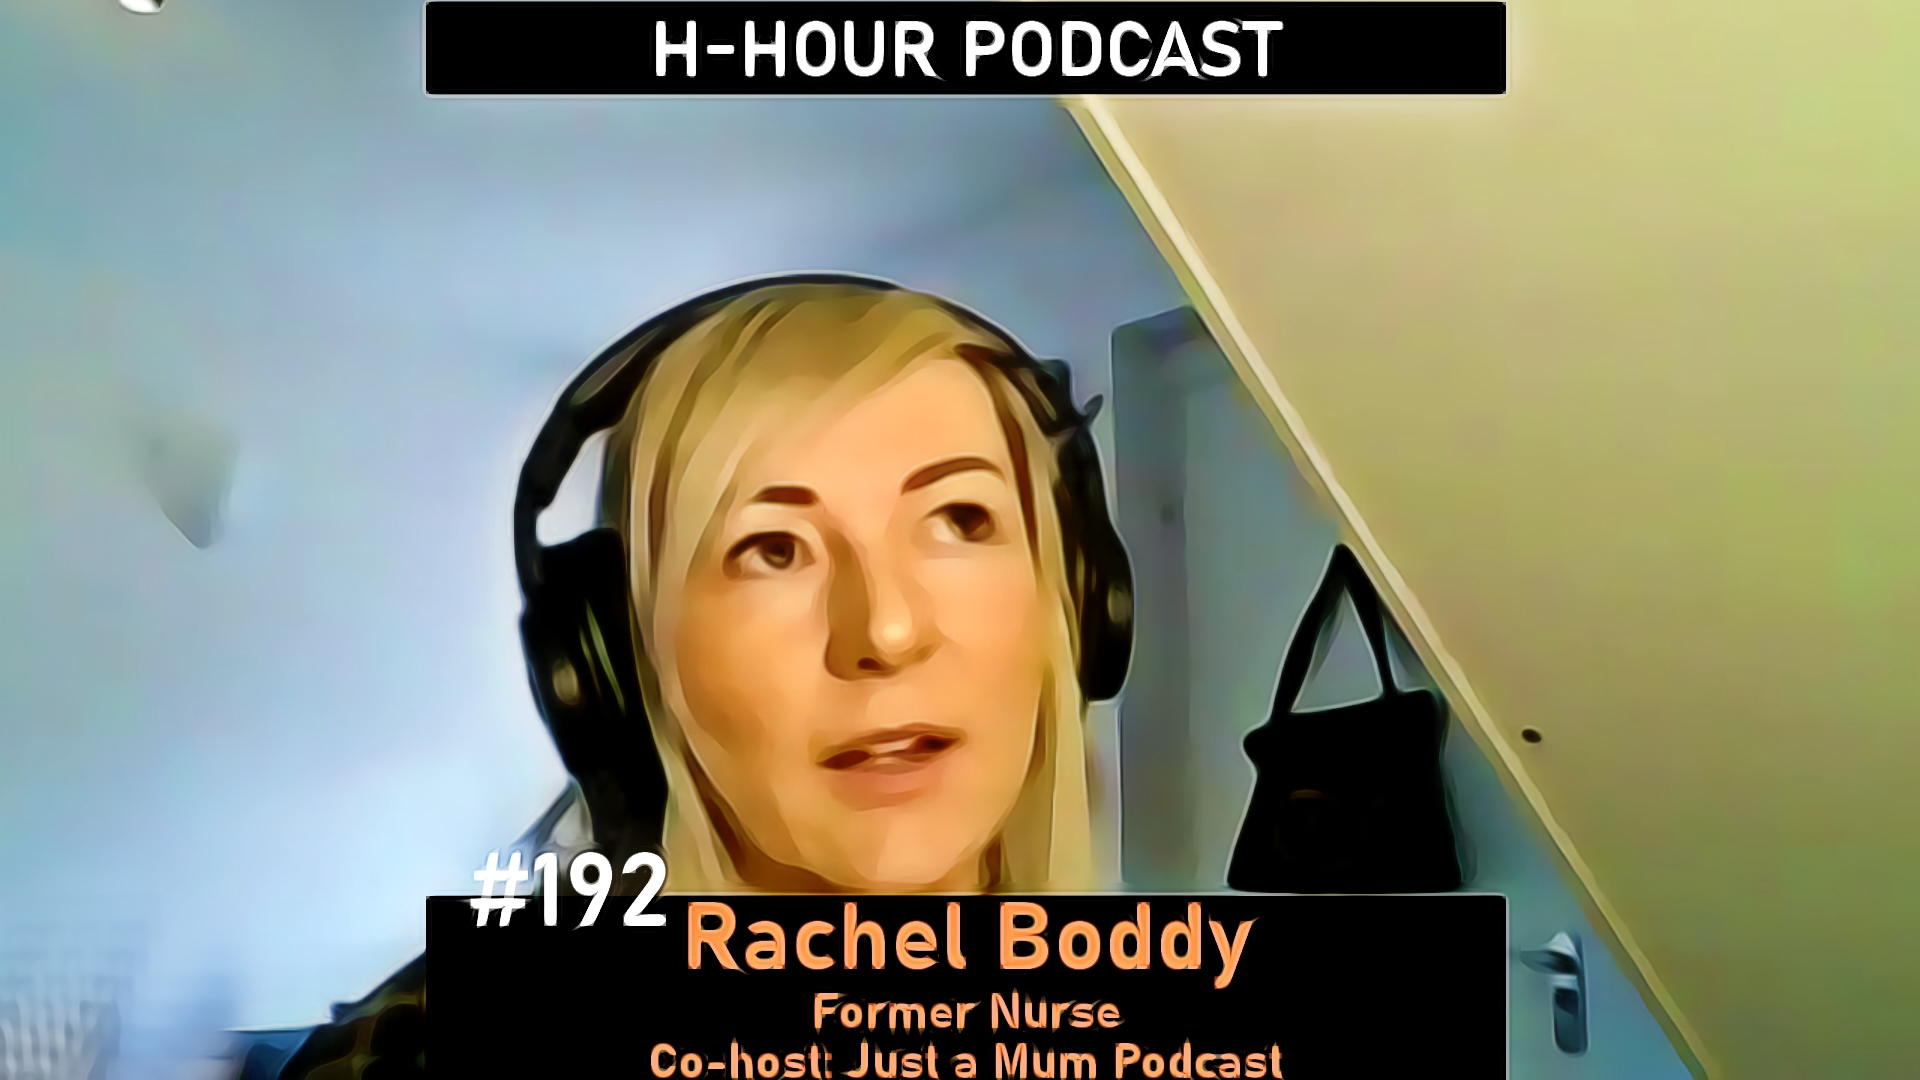 h-hour Podcast NFT #192 Rachel Boddy cover image